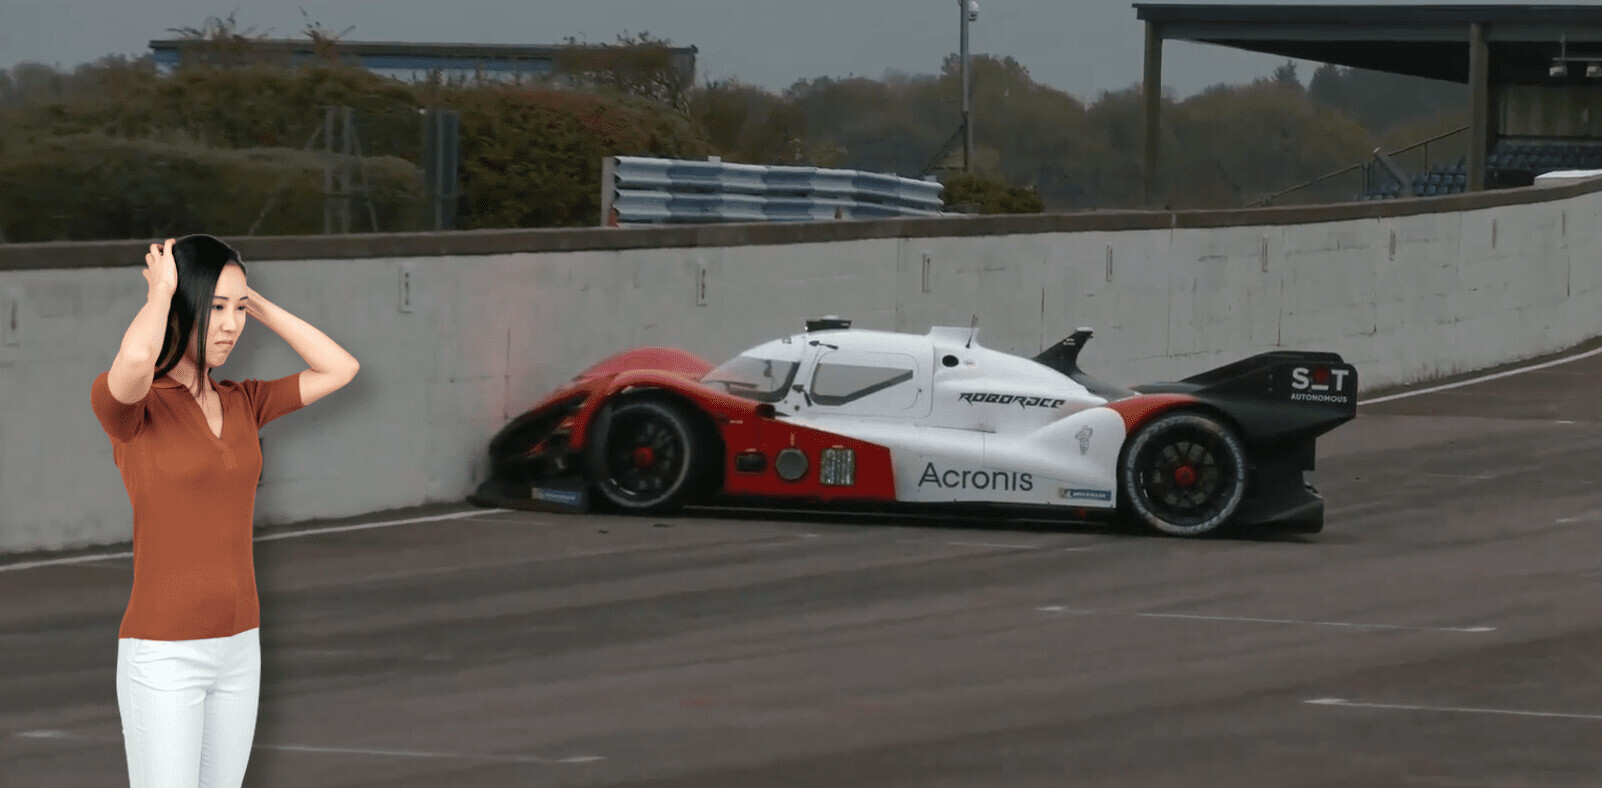 Watch this self-driving race car hilariously smash into a wall